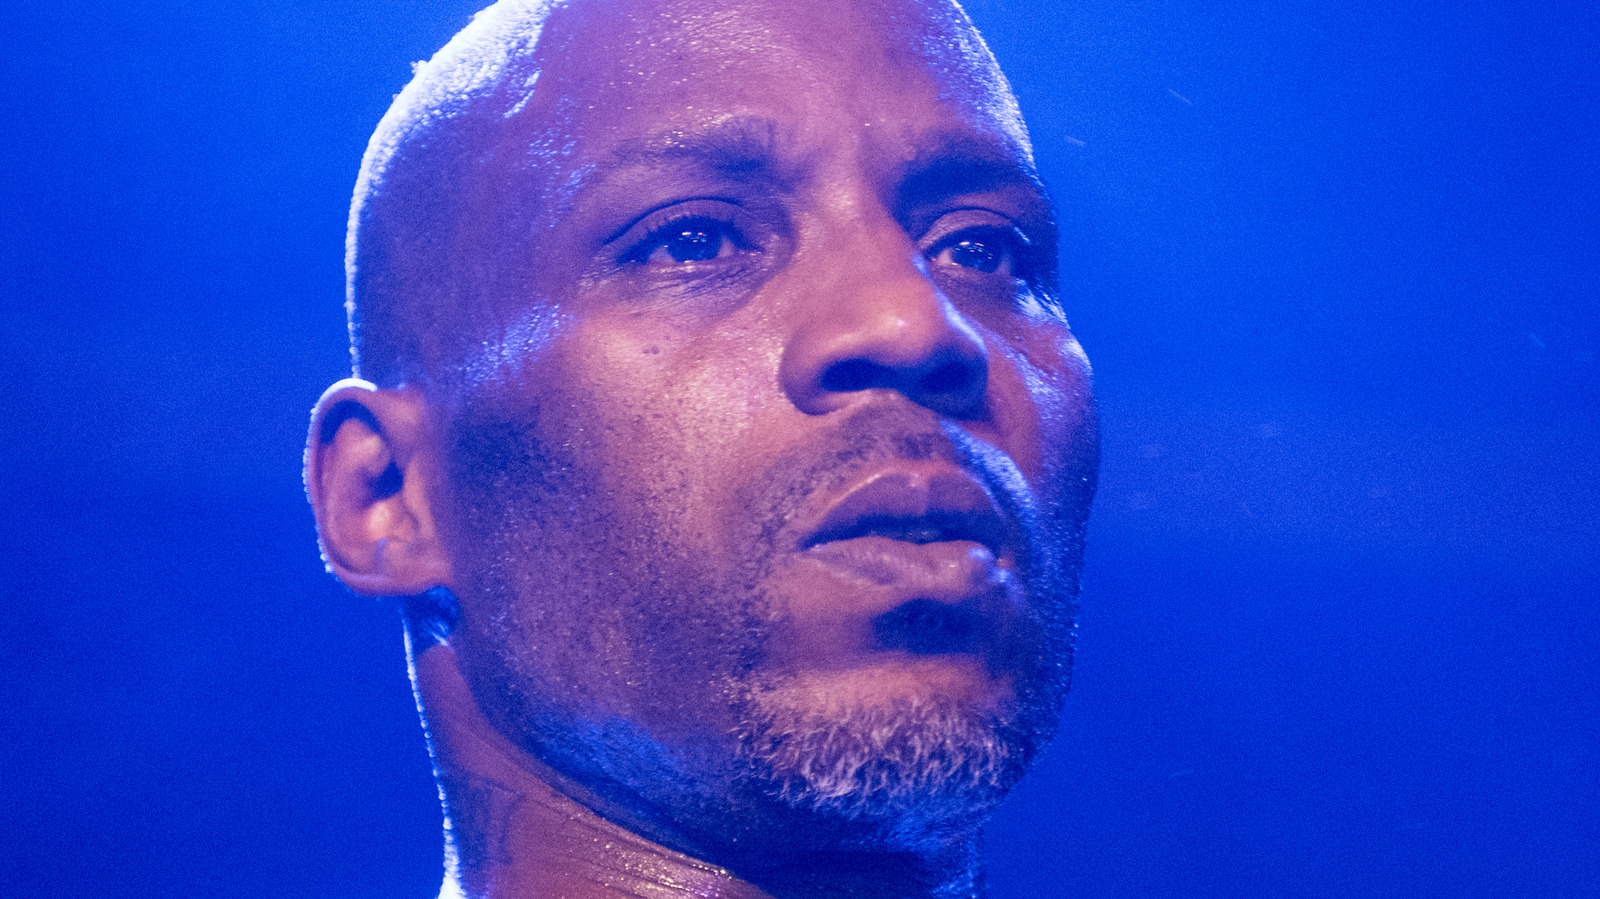 DMX's Net Worth At The Time Of His Death Might Surprise You